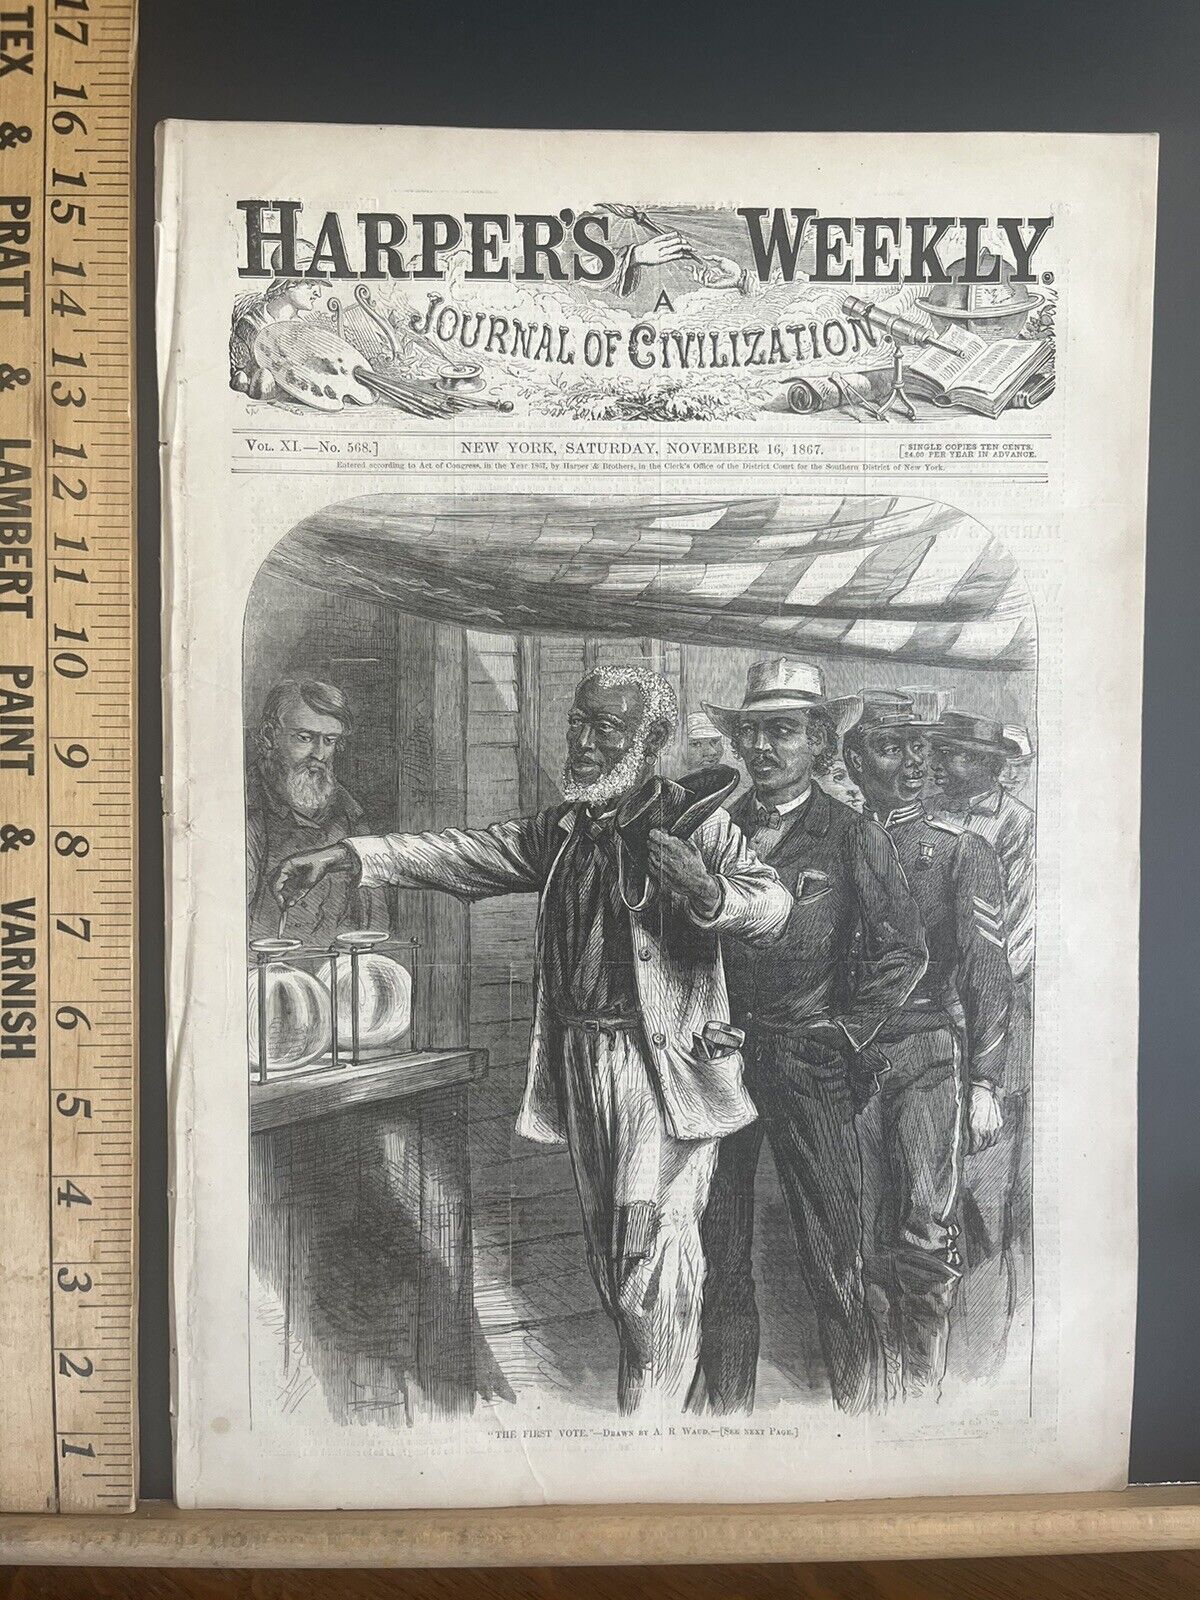 COMPLETE ORIGINAL 11/26/1867 ISSUE OF HARPERS WEEKLY MAGAZINE: “THE FIRST VOTE”